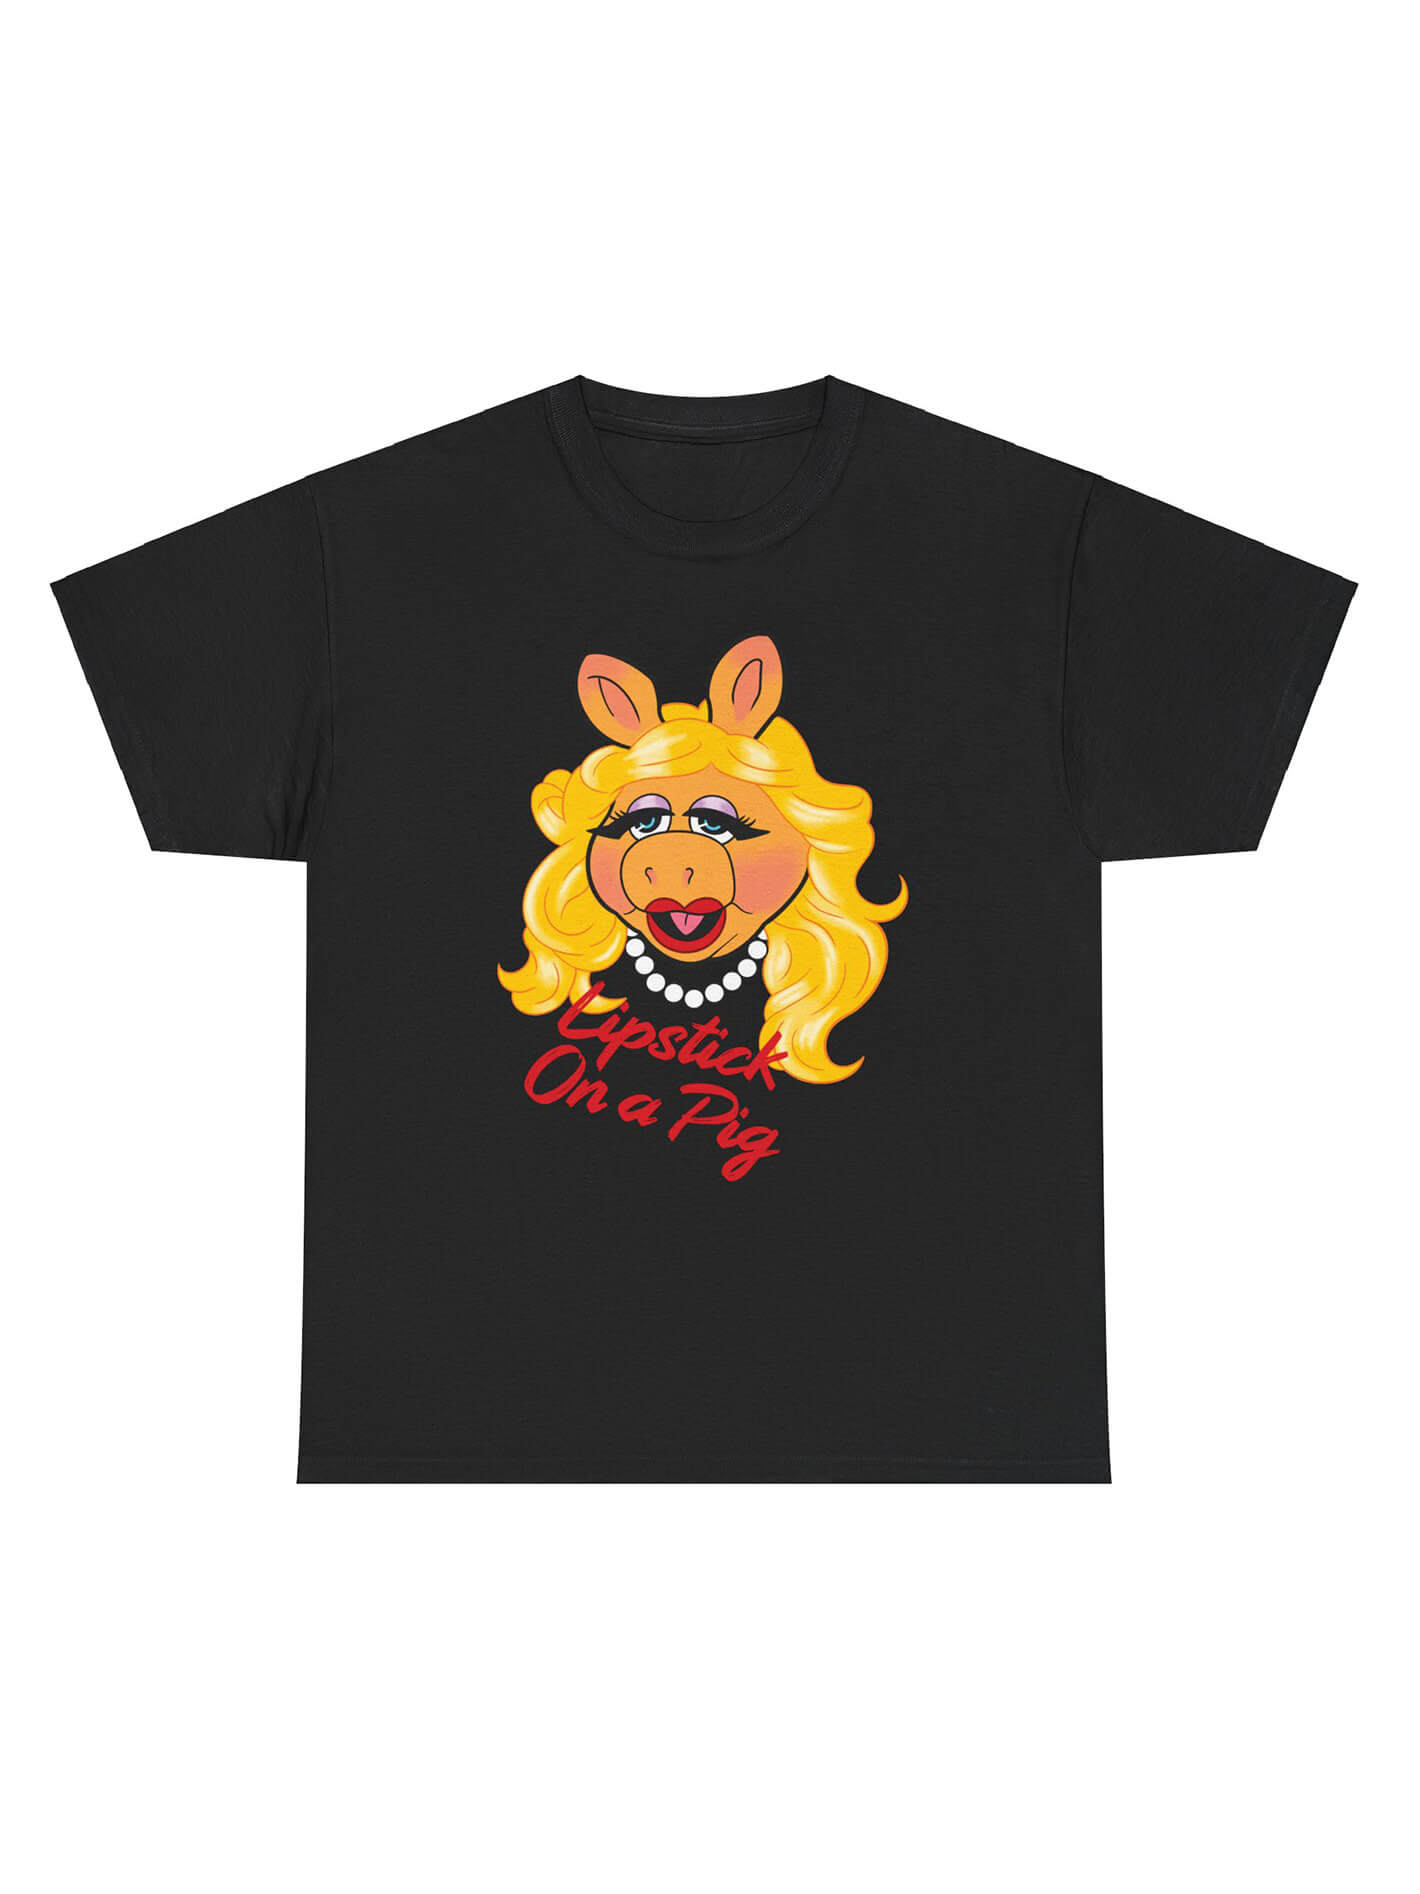 Lipstick on a pig graphic tee.